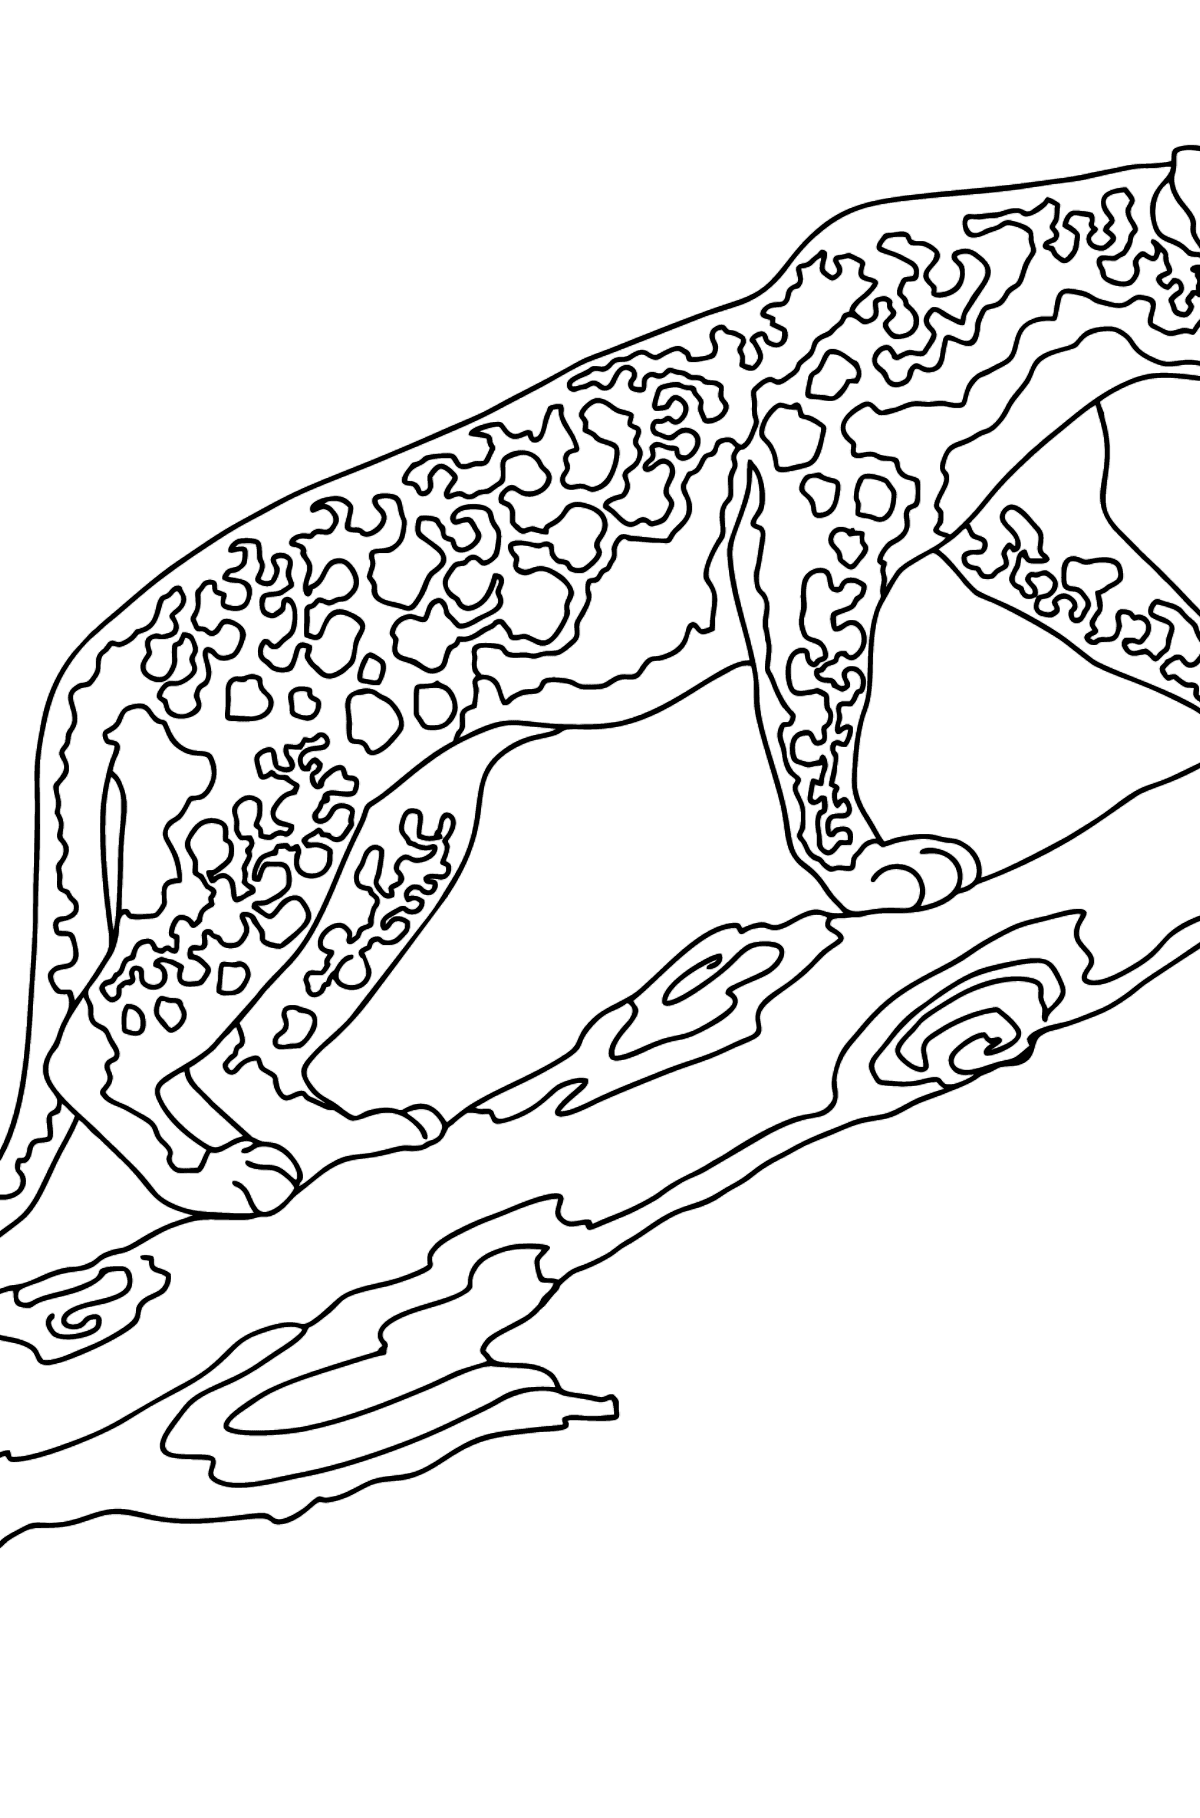 Coloring Page - A Leopard is on a Hunt - Coloring Pages for Kids